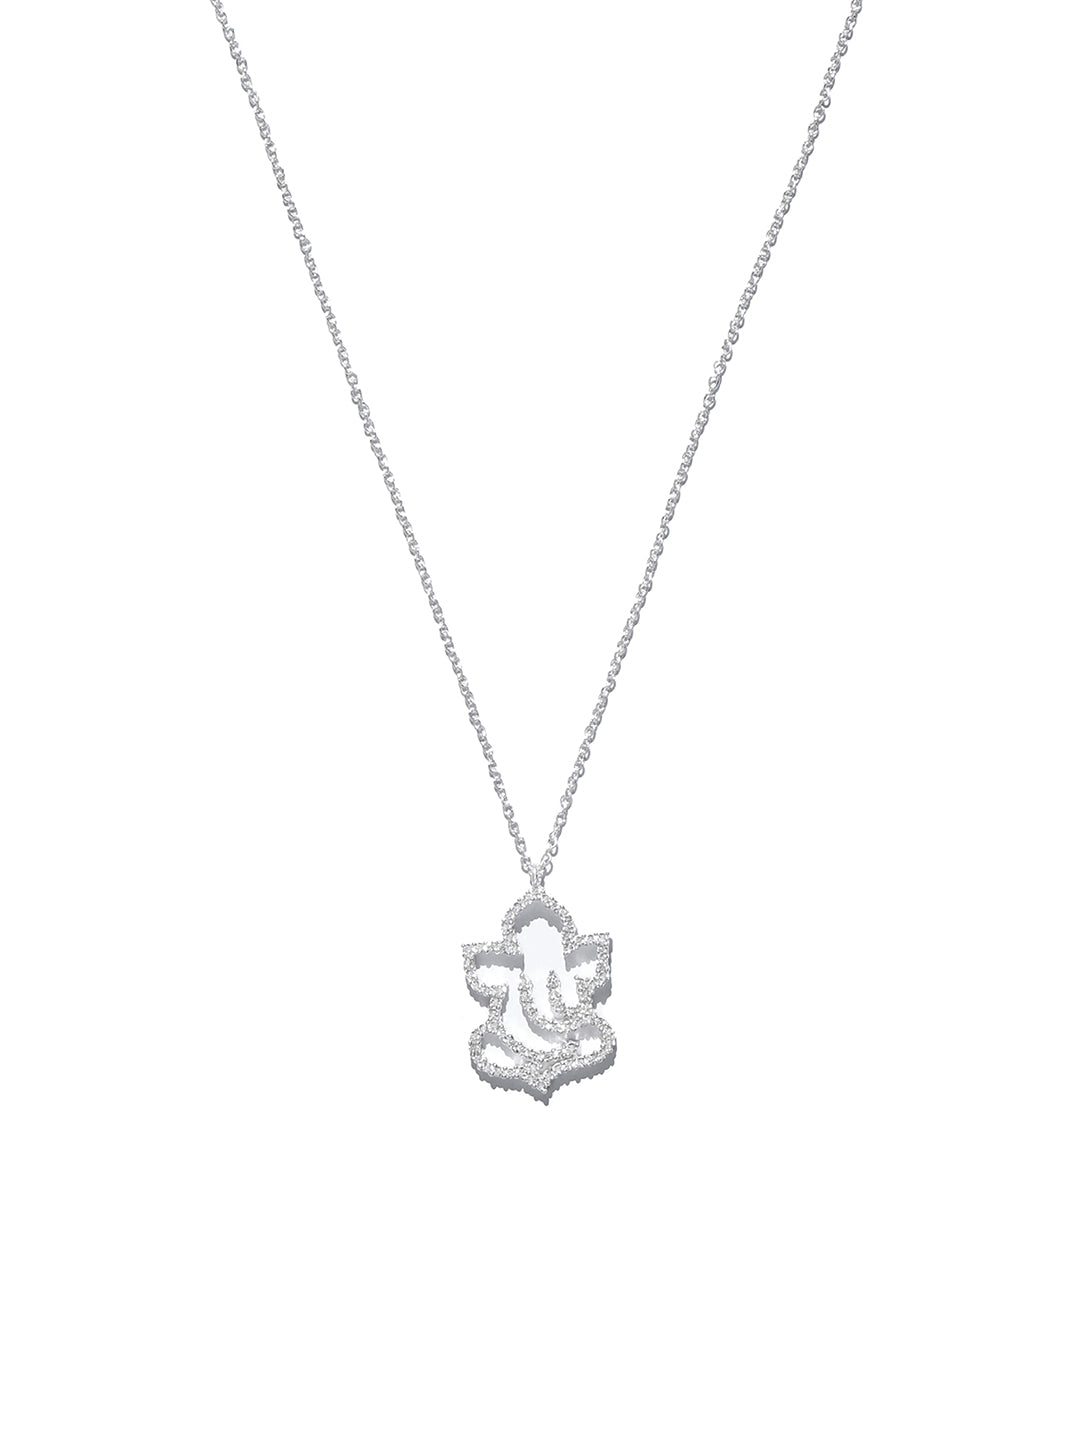 Cute Ganesha Sterling Silver Necklace